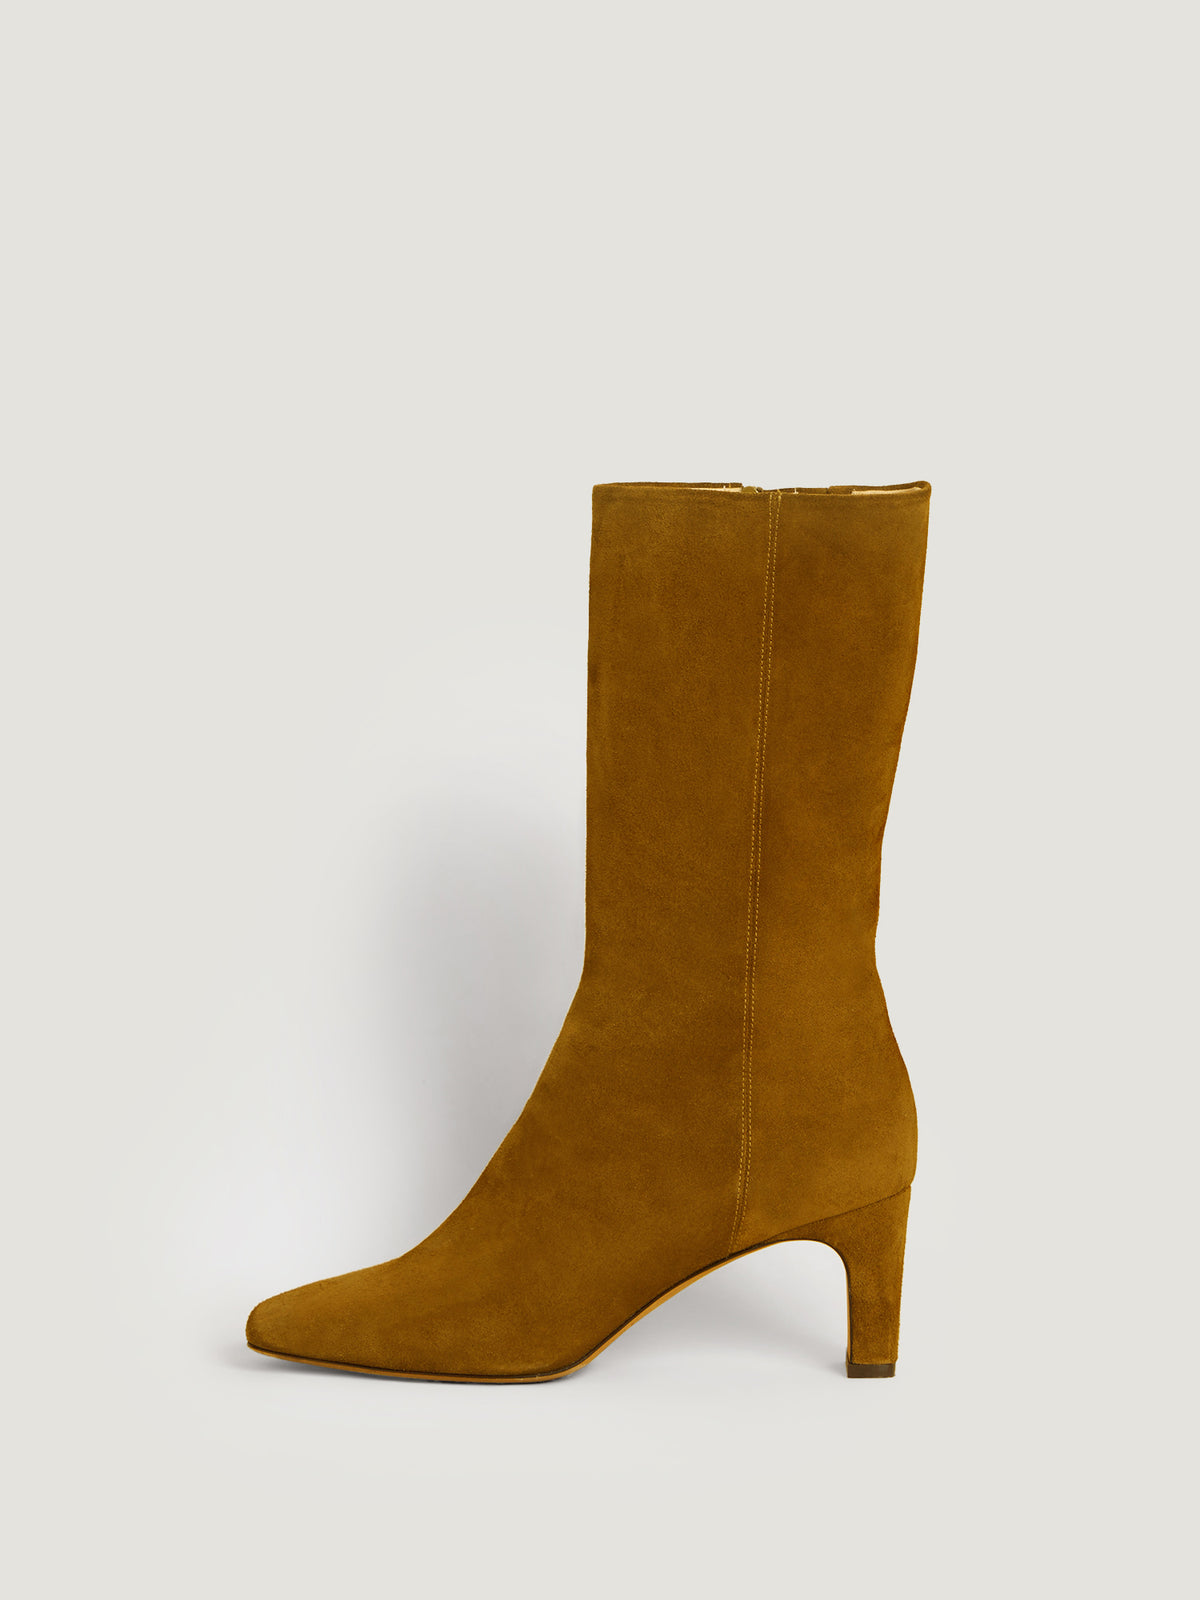 Meda Black Ankle Boots for Women - Fall/Winter collection - Camper USA